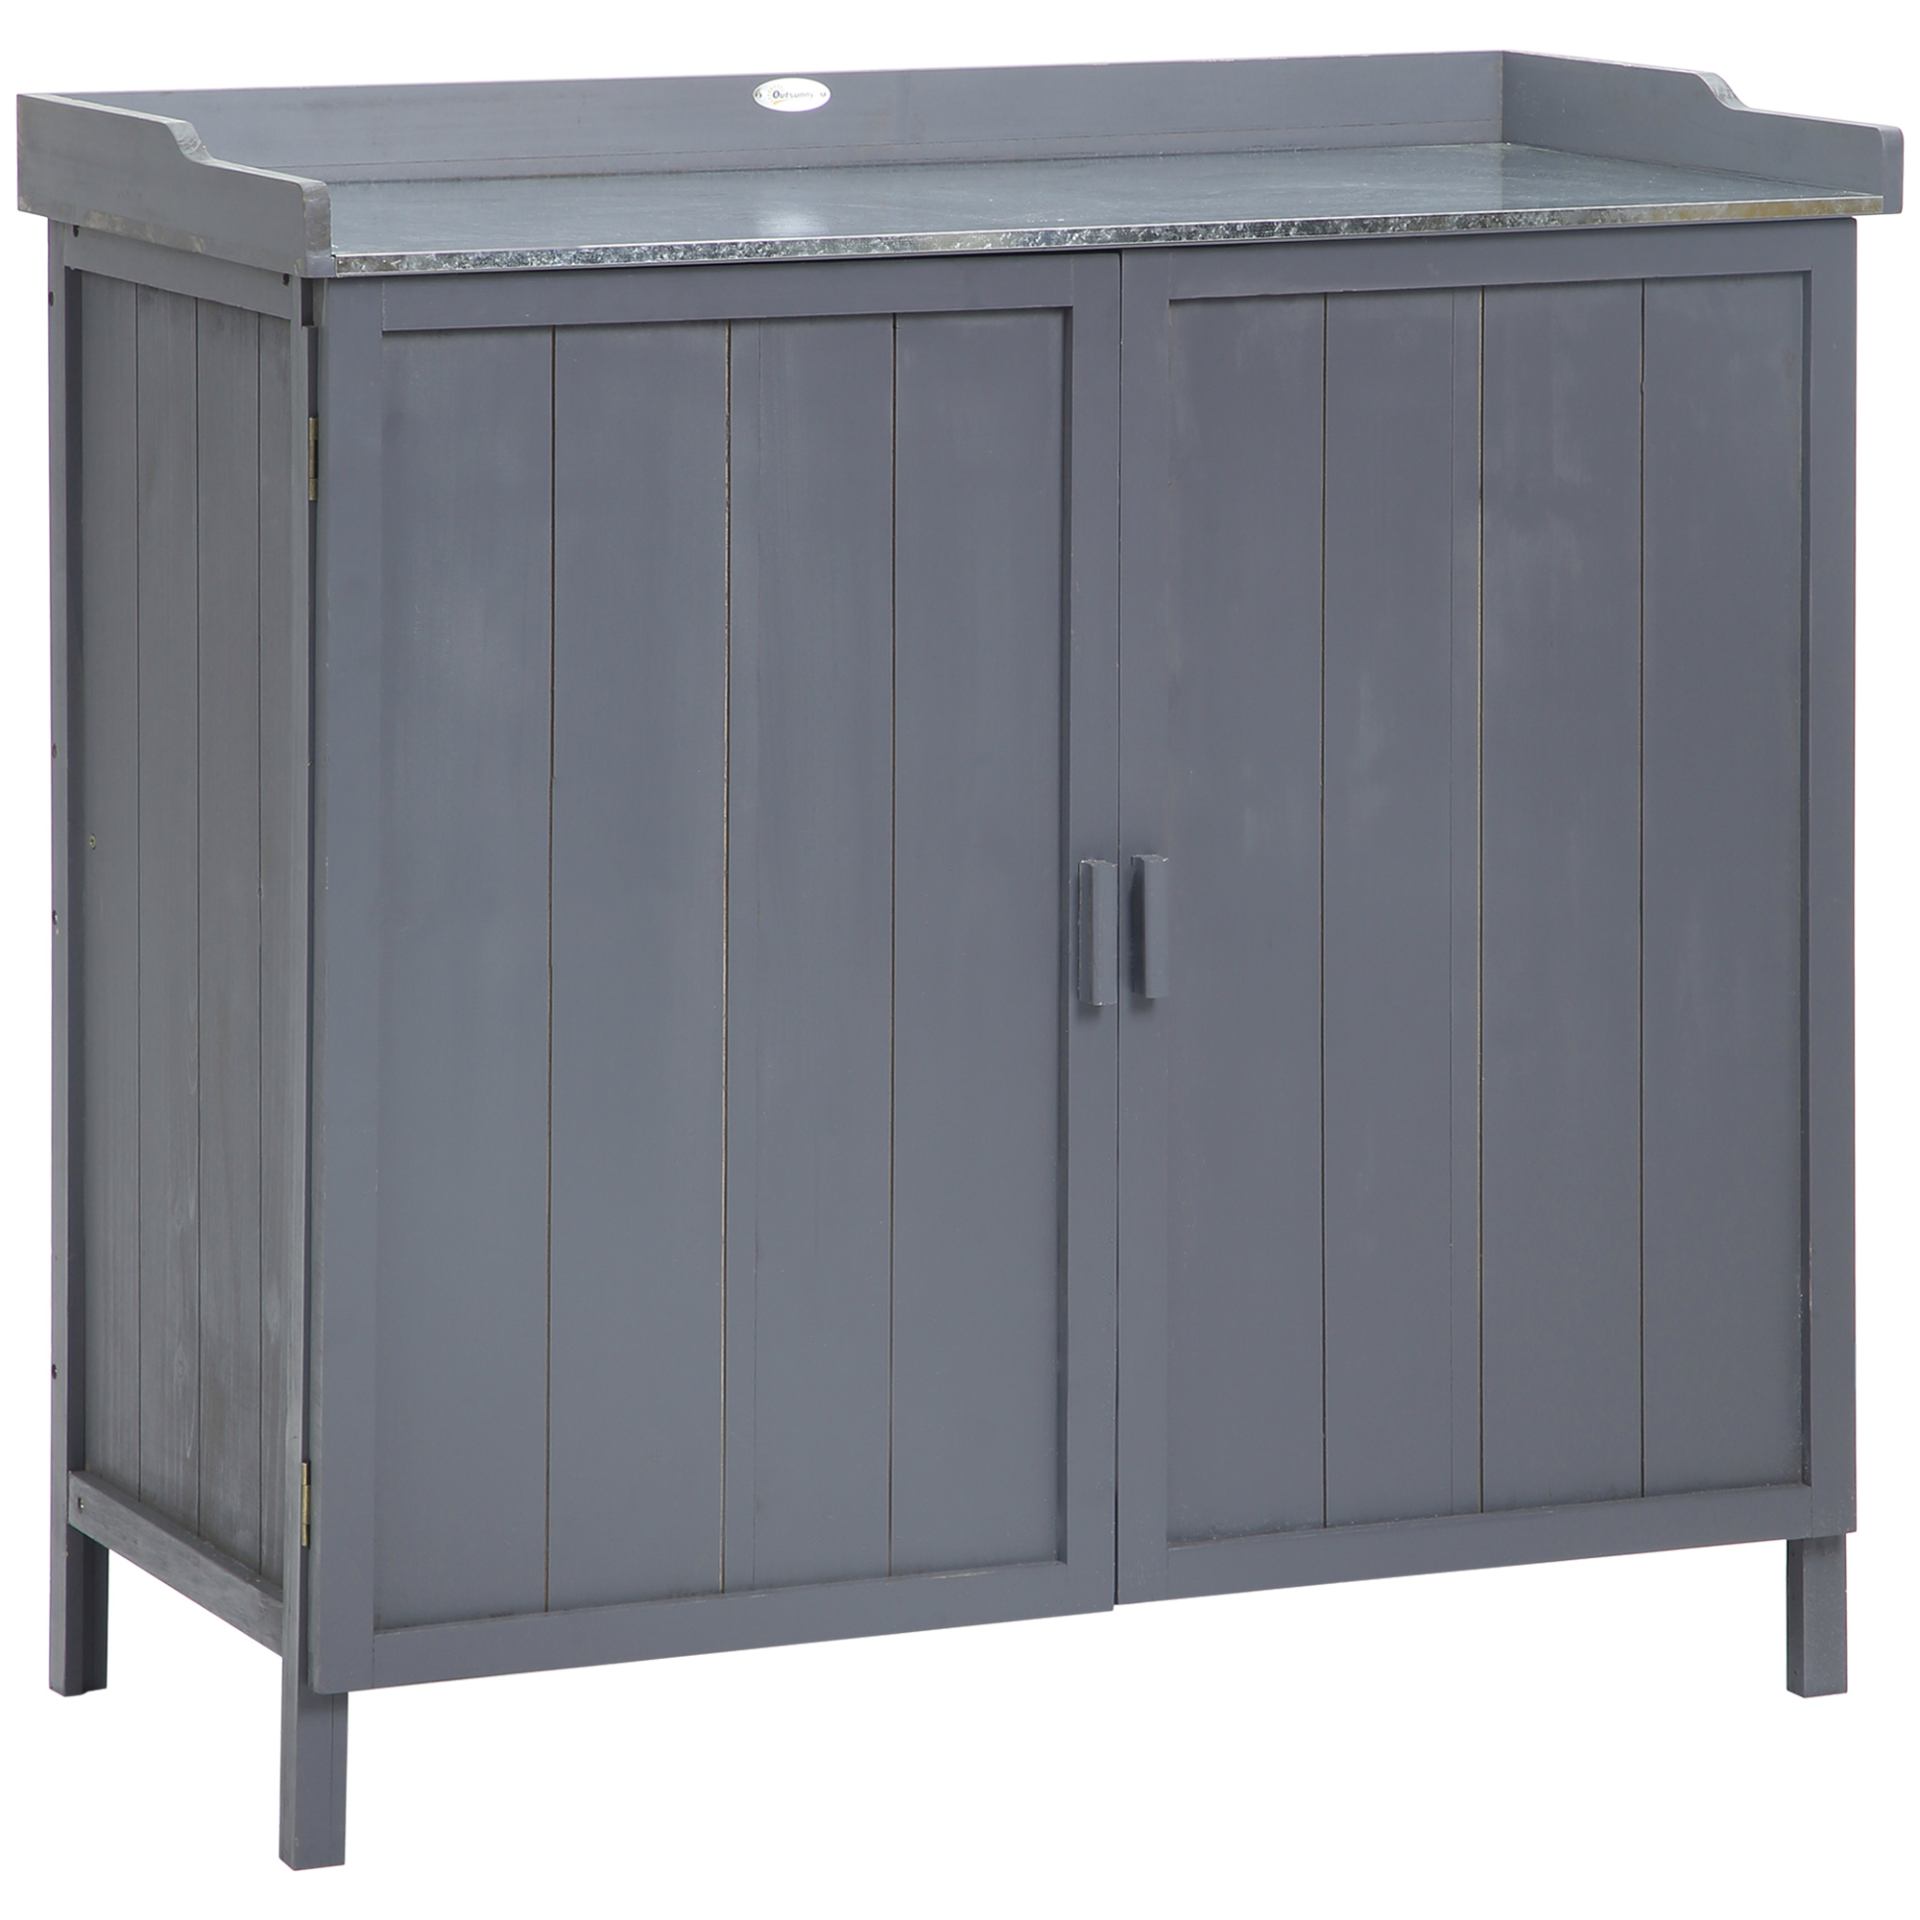 Outsunny Garden Storage Cabinet, Outdoor Tool Shed, Potting Bench Table with Galvanized Top and Two Shelves for Yard Tools or Pool Accessories, Grey